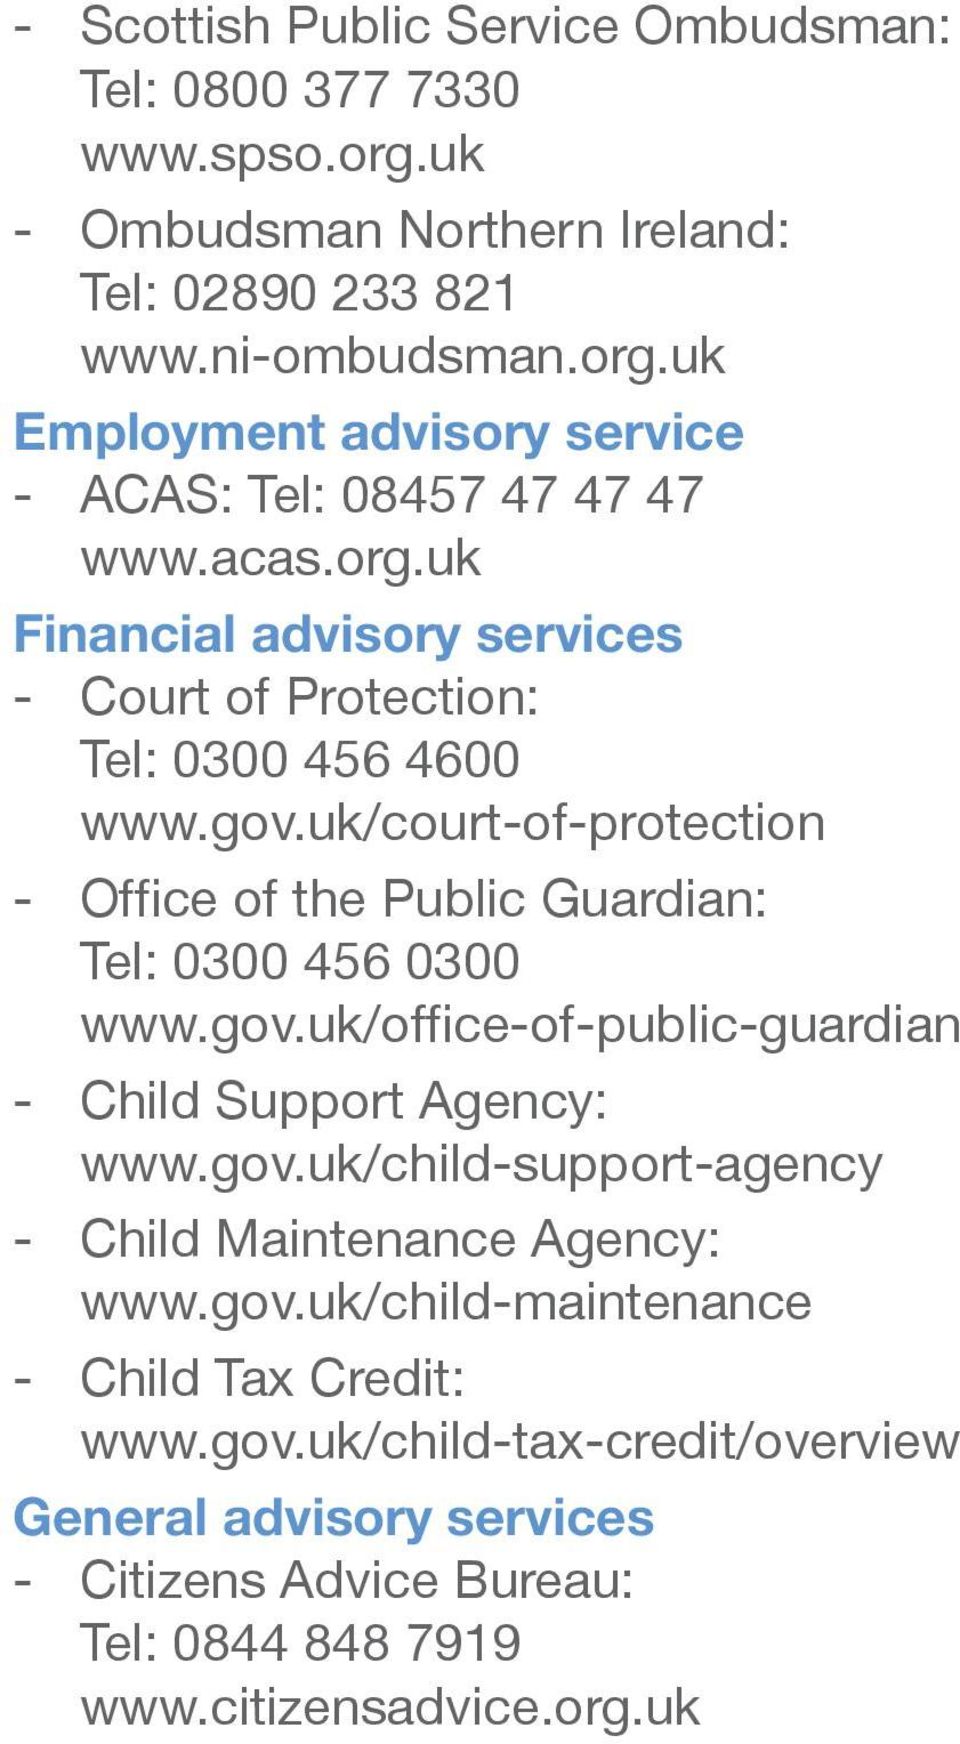 gov.uk/office-of-public-guardian - Child Support Agency: www.gov.uk/child-support-agency - Child Maintenance Agency: www.gov.uk/child-maintenance - Child Tax Credit: www.